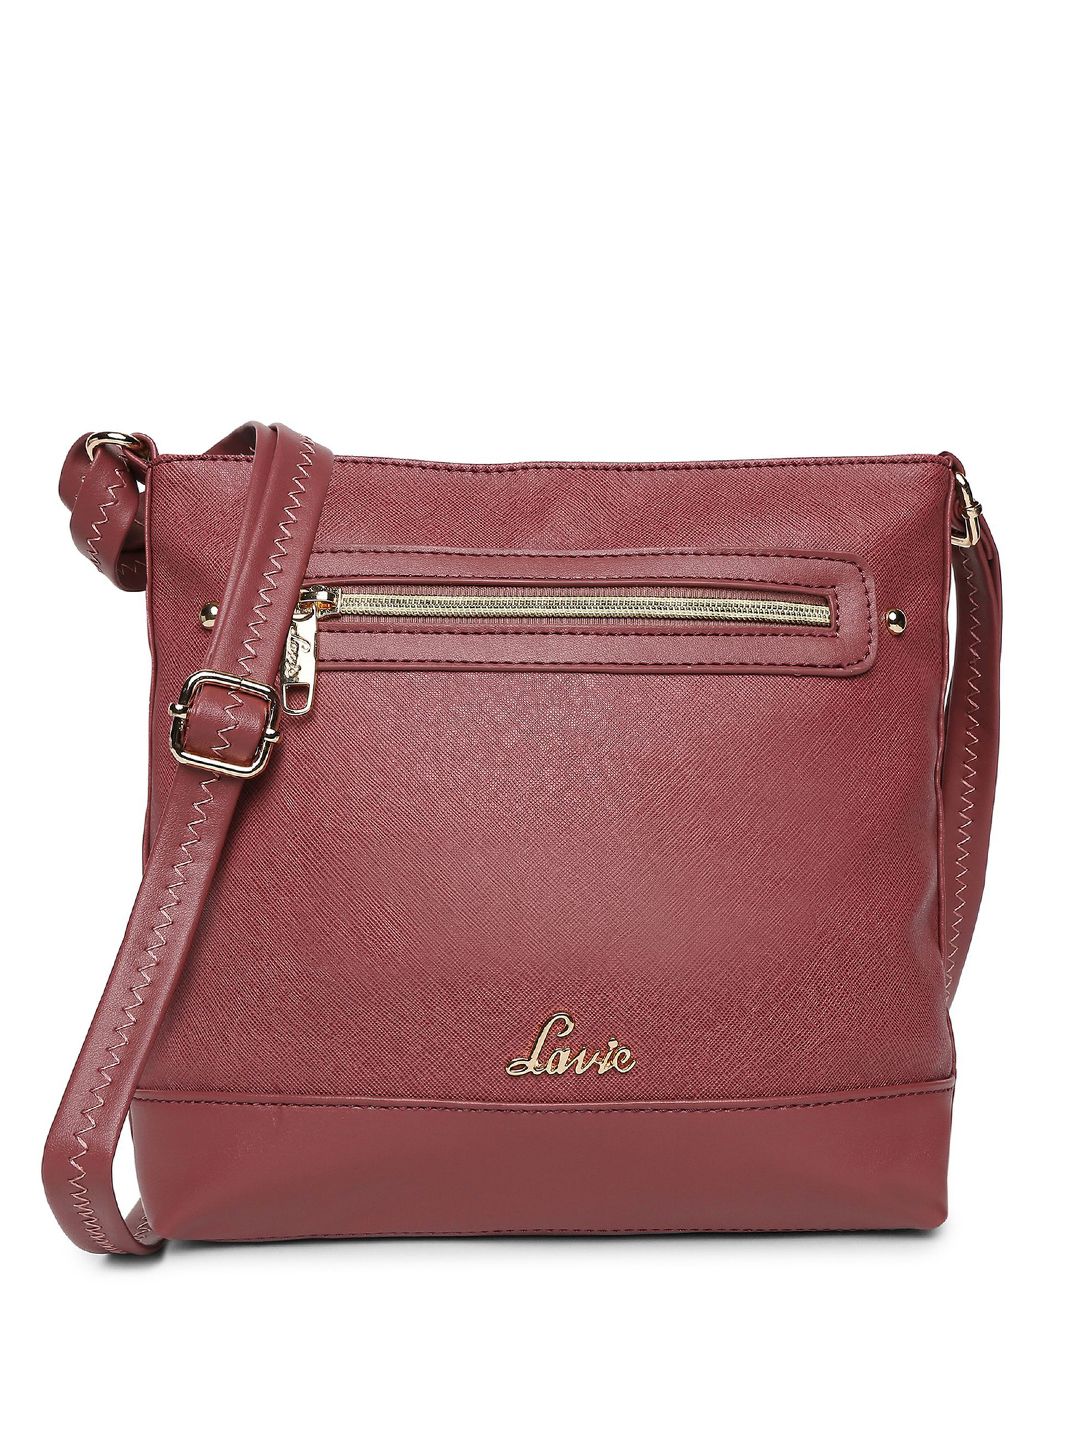 Lavie Pink Saffiano Textured Structured Sling Bag Price in India